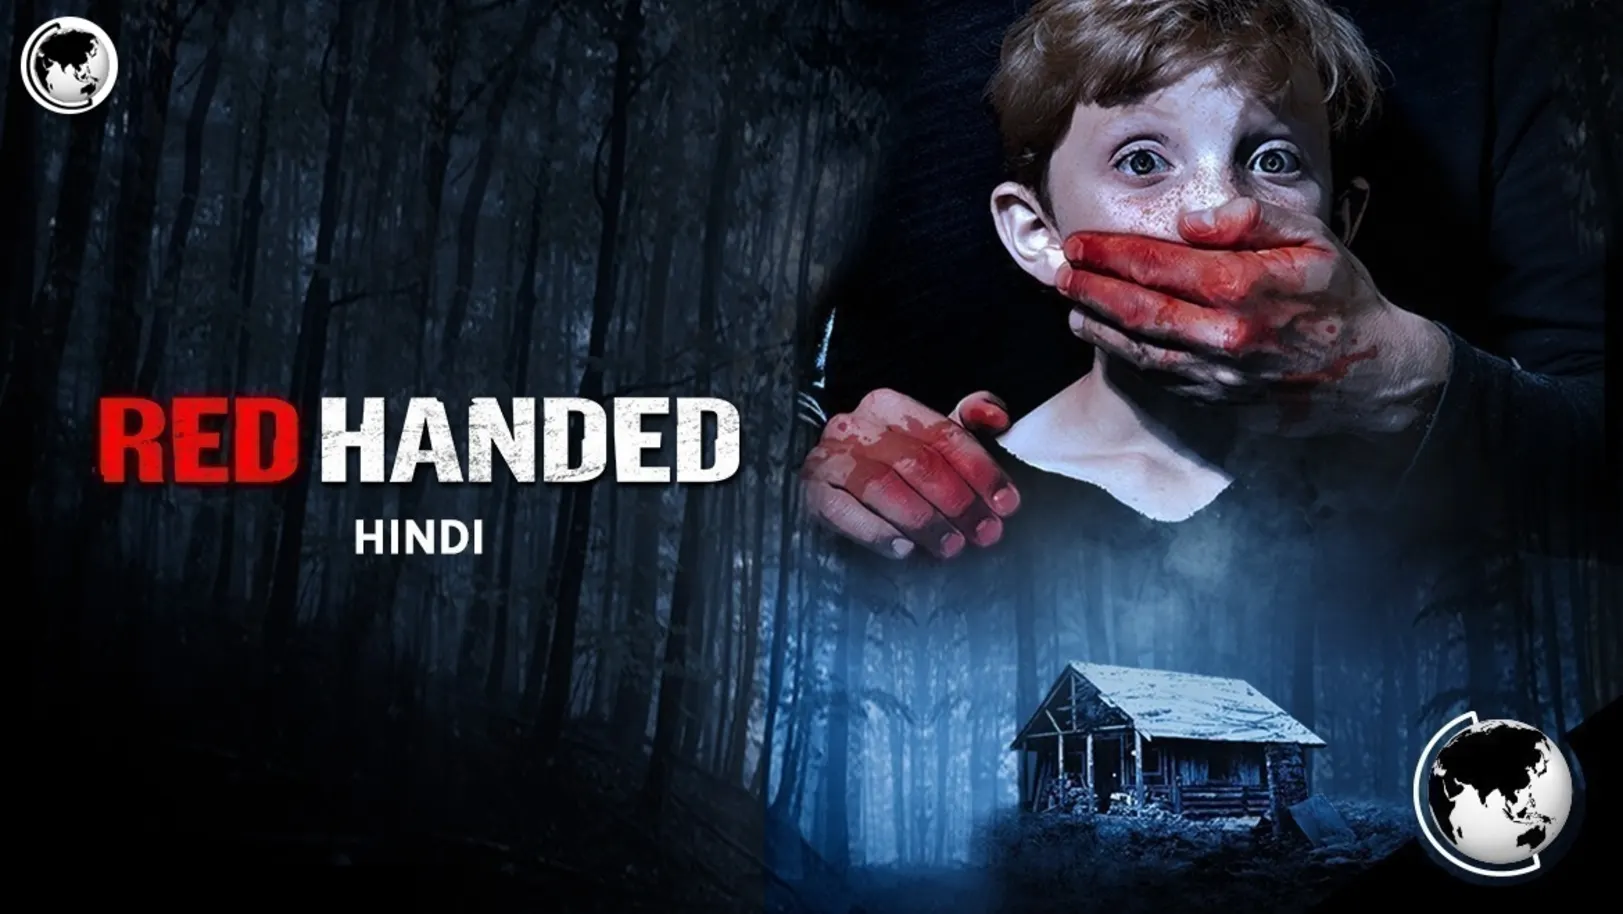 Red Handed Movie